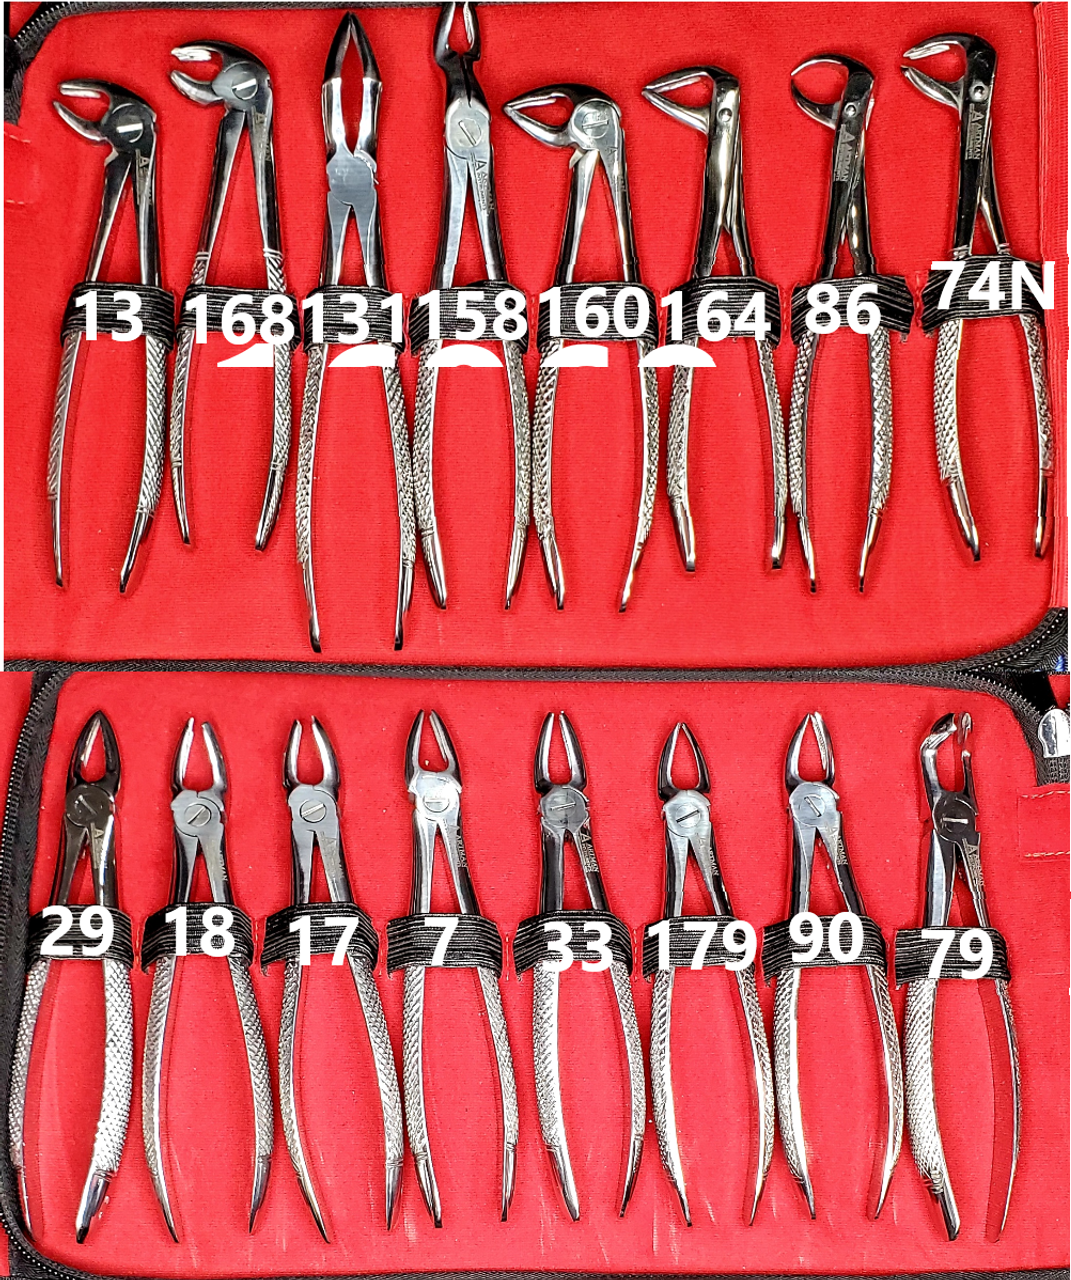 Set of 16 Each Stainless-Steel Oral Dental Extraction Surgery EXTRACTING Forceps Dental Instruments ARTMAN Brand